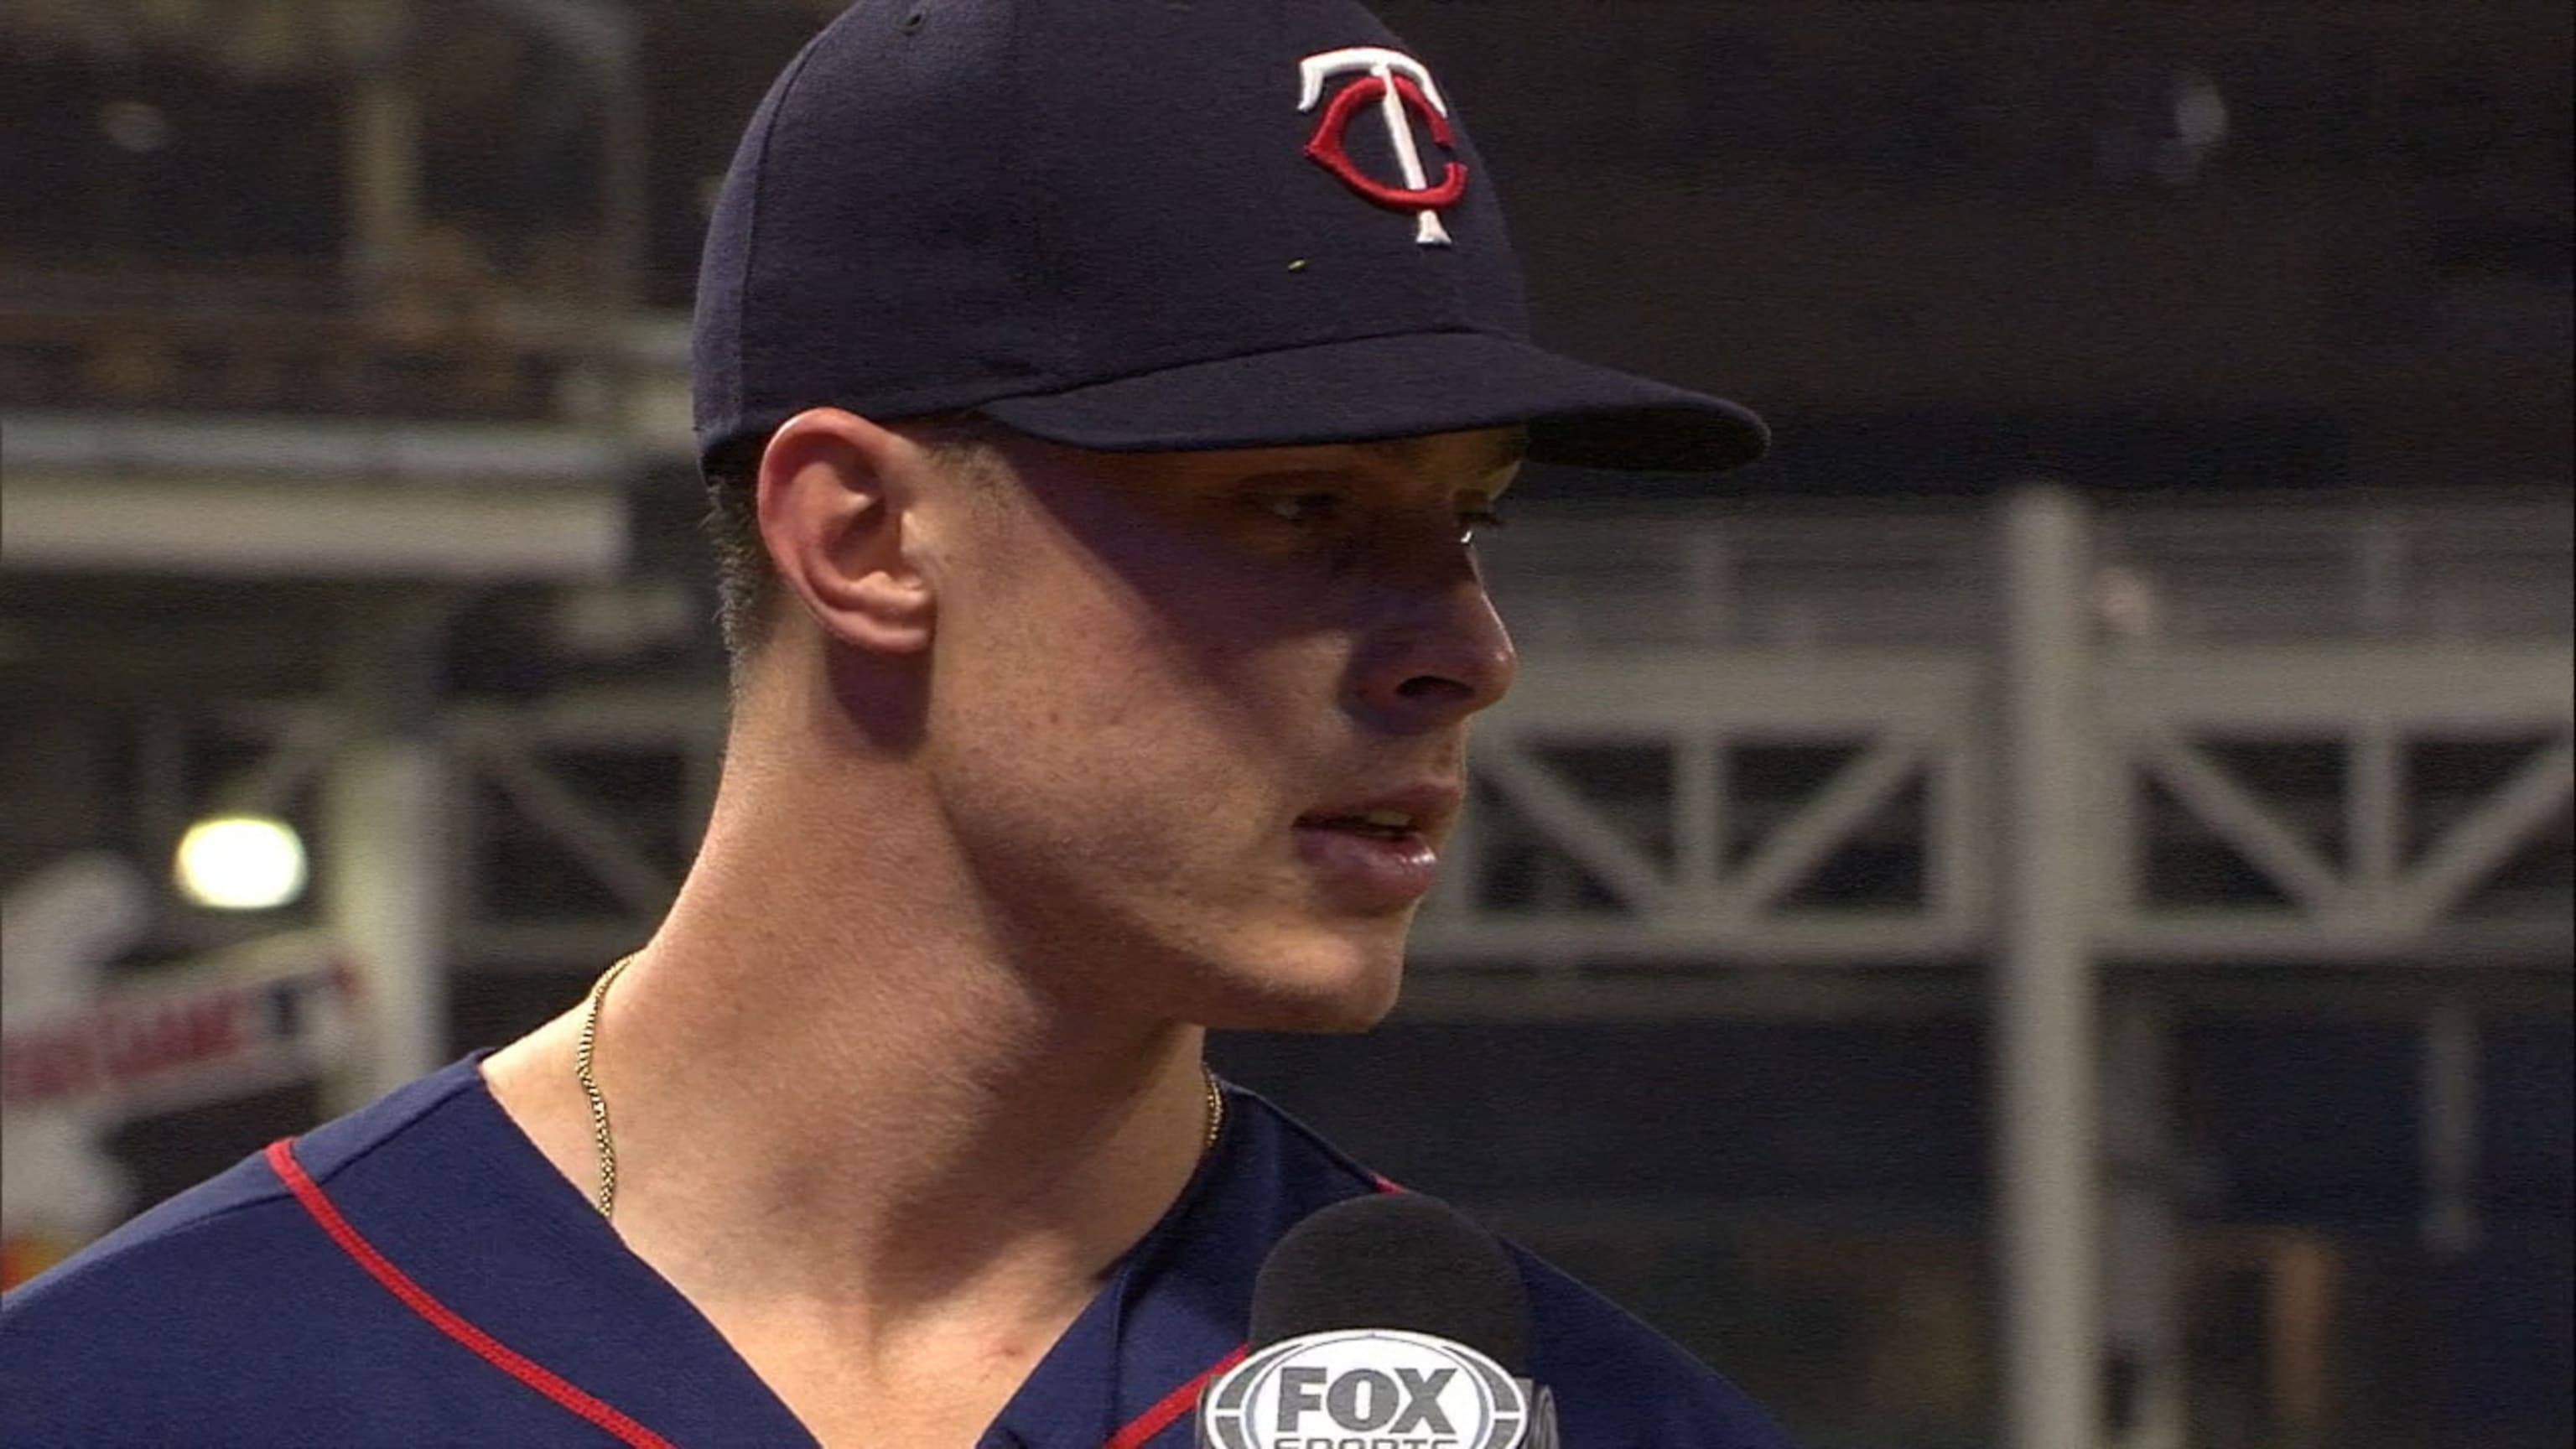 What Pros Wear - Max Kepler walked it off for the @twins